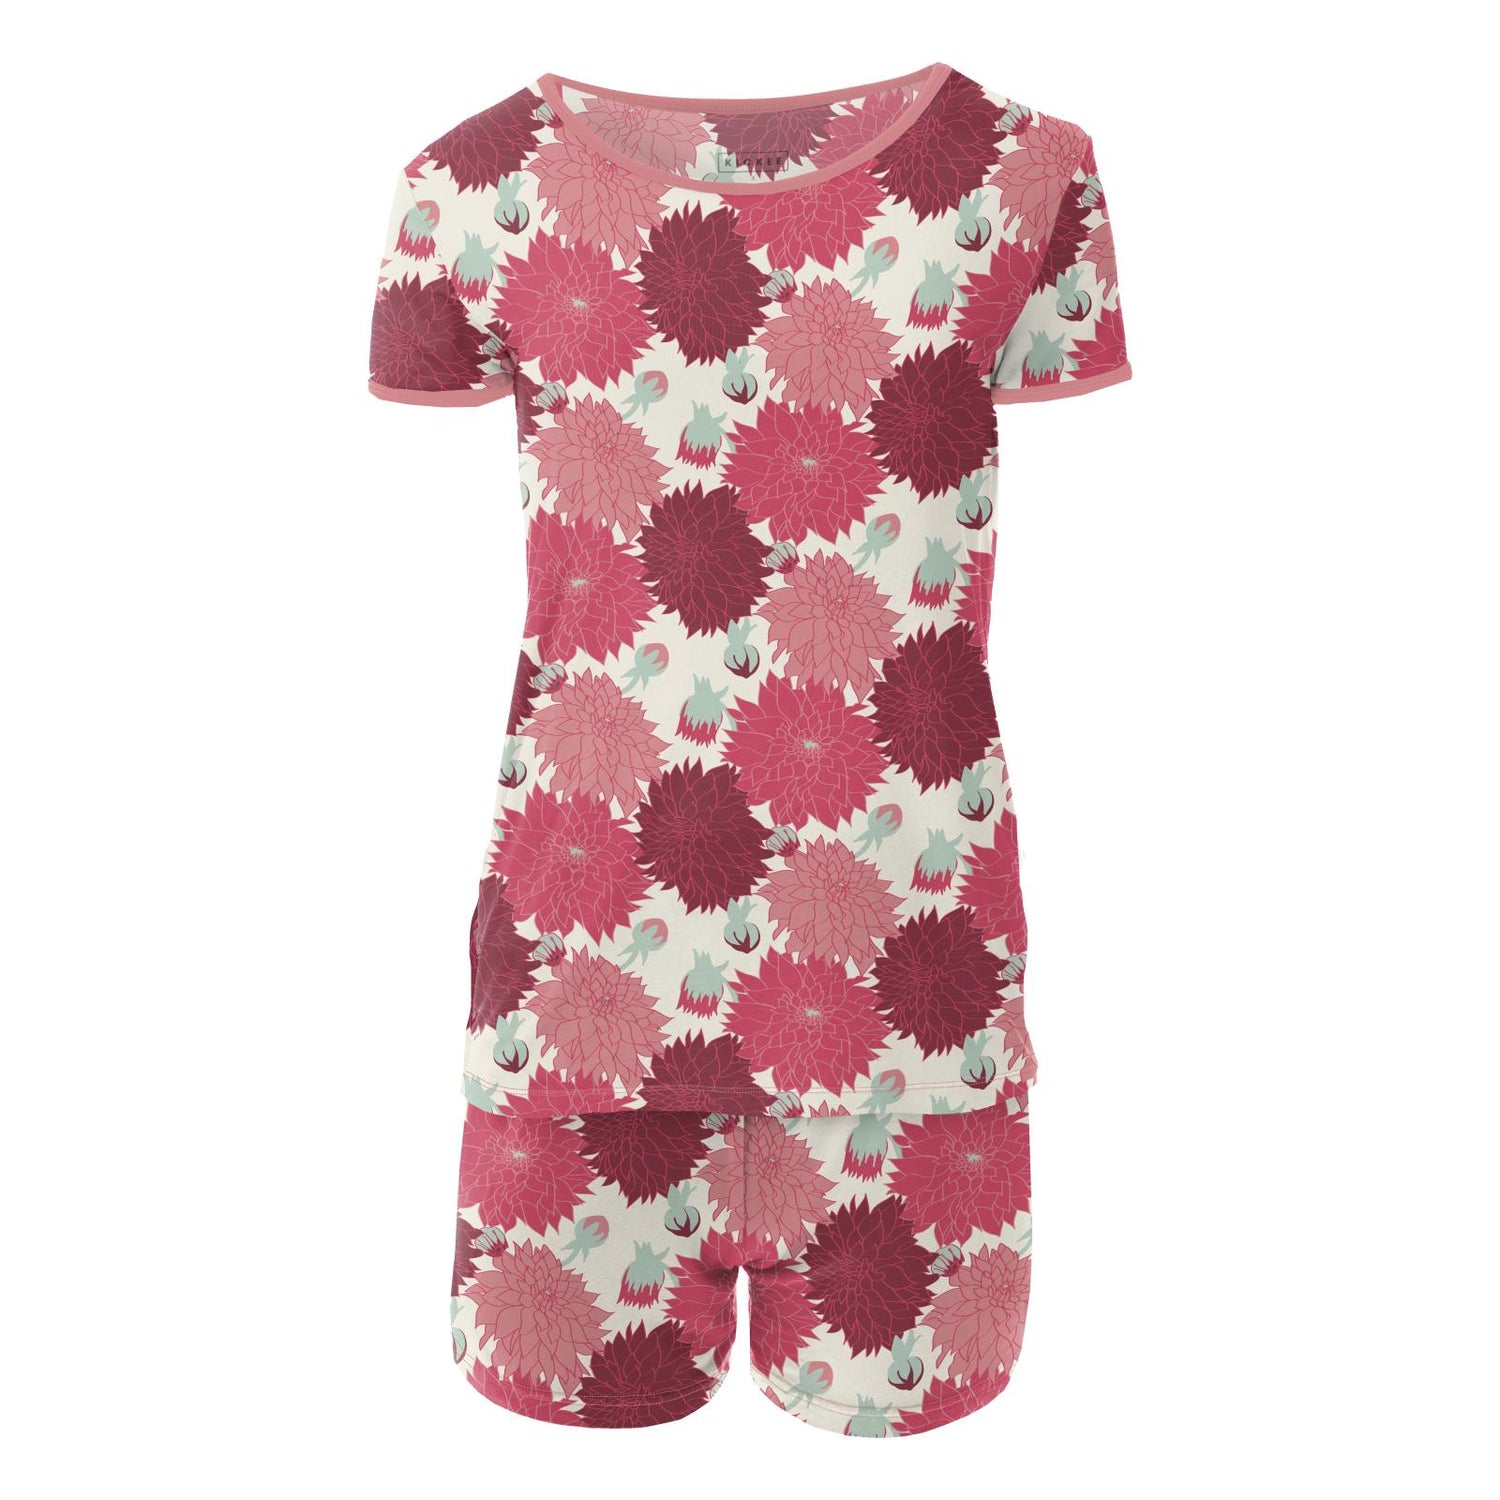 Women's Print Short Sleeve Fitted Pajama Set with Shorts in Natural Dahlias